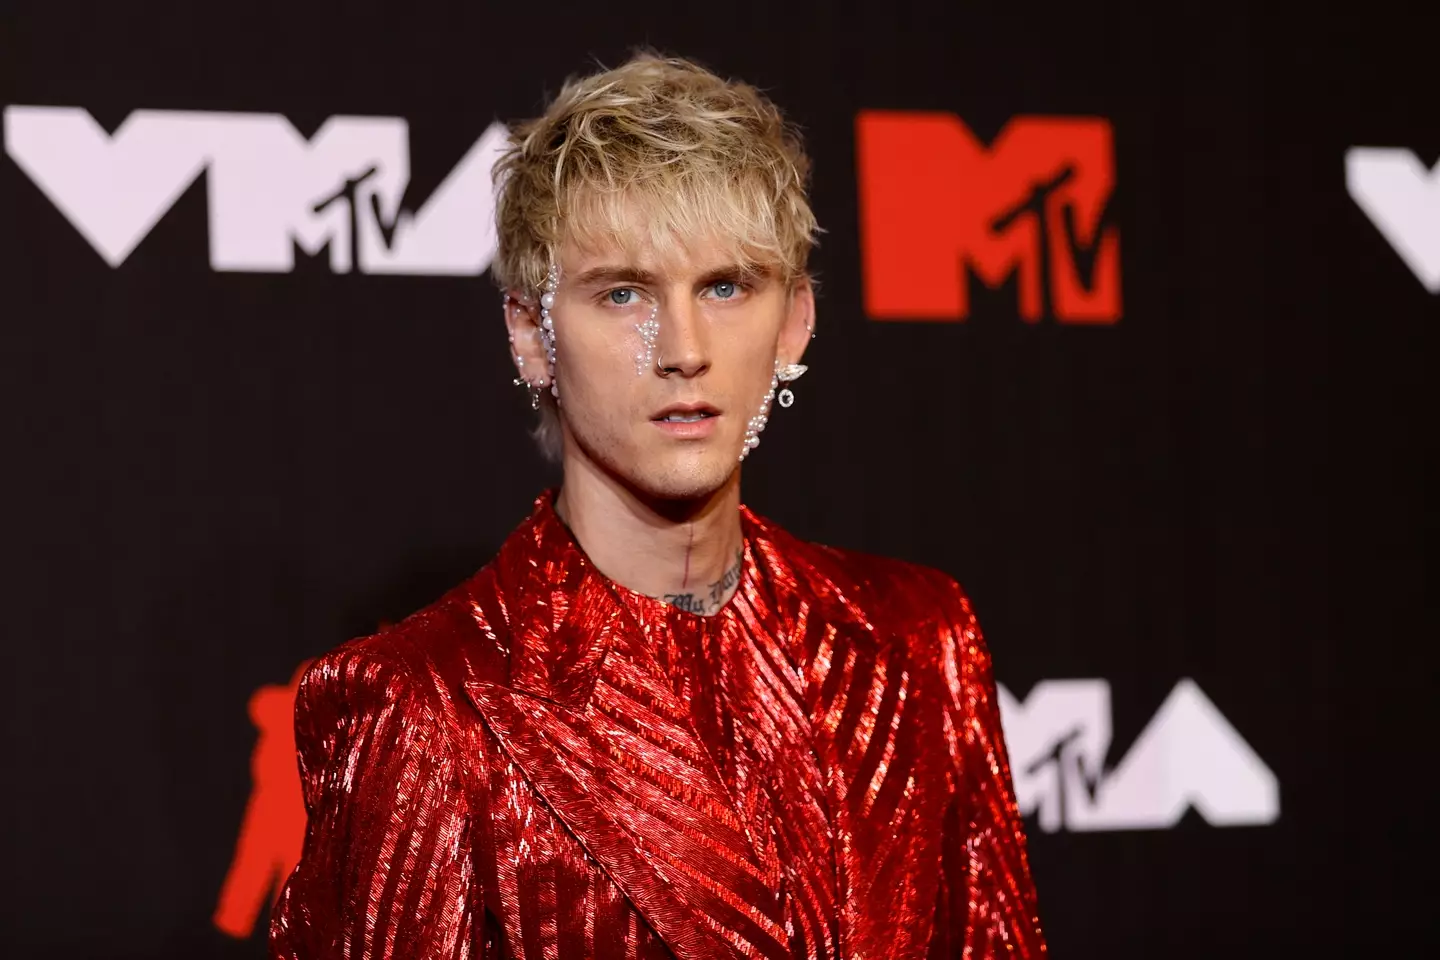 The rapper seems to have officially dropped the name Machine Gun Kelly.